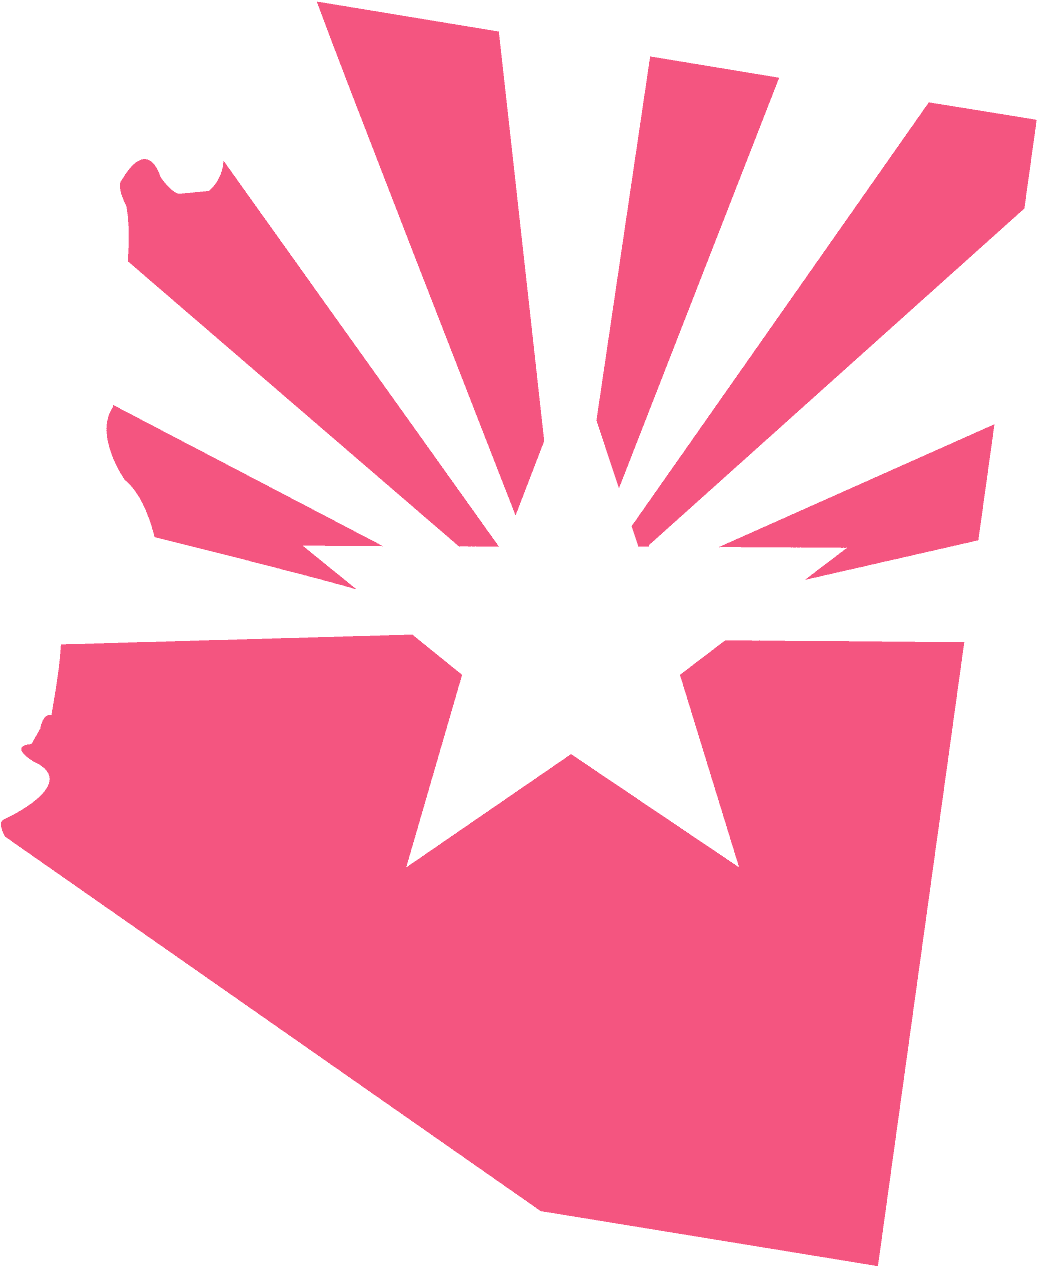 A Pink And Black Sunburst With A Star